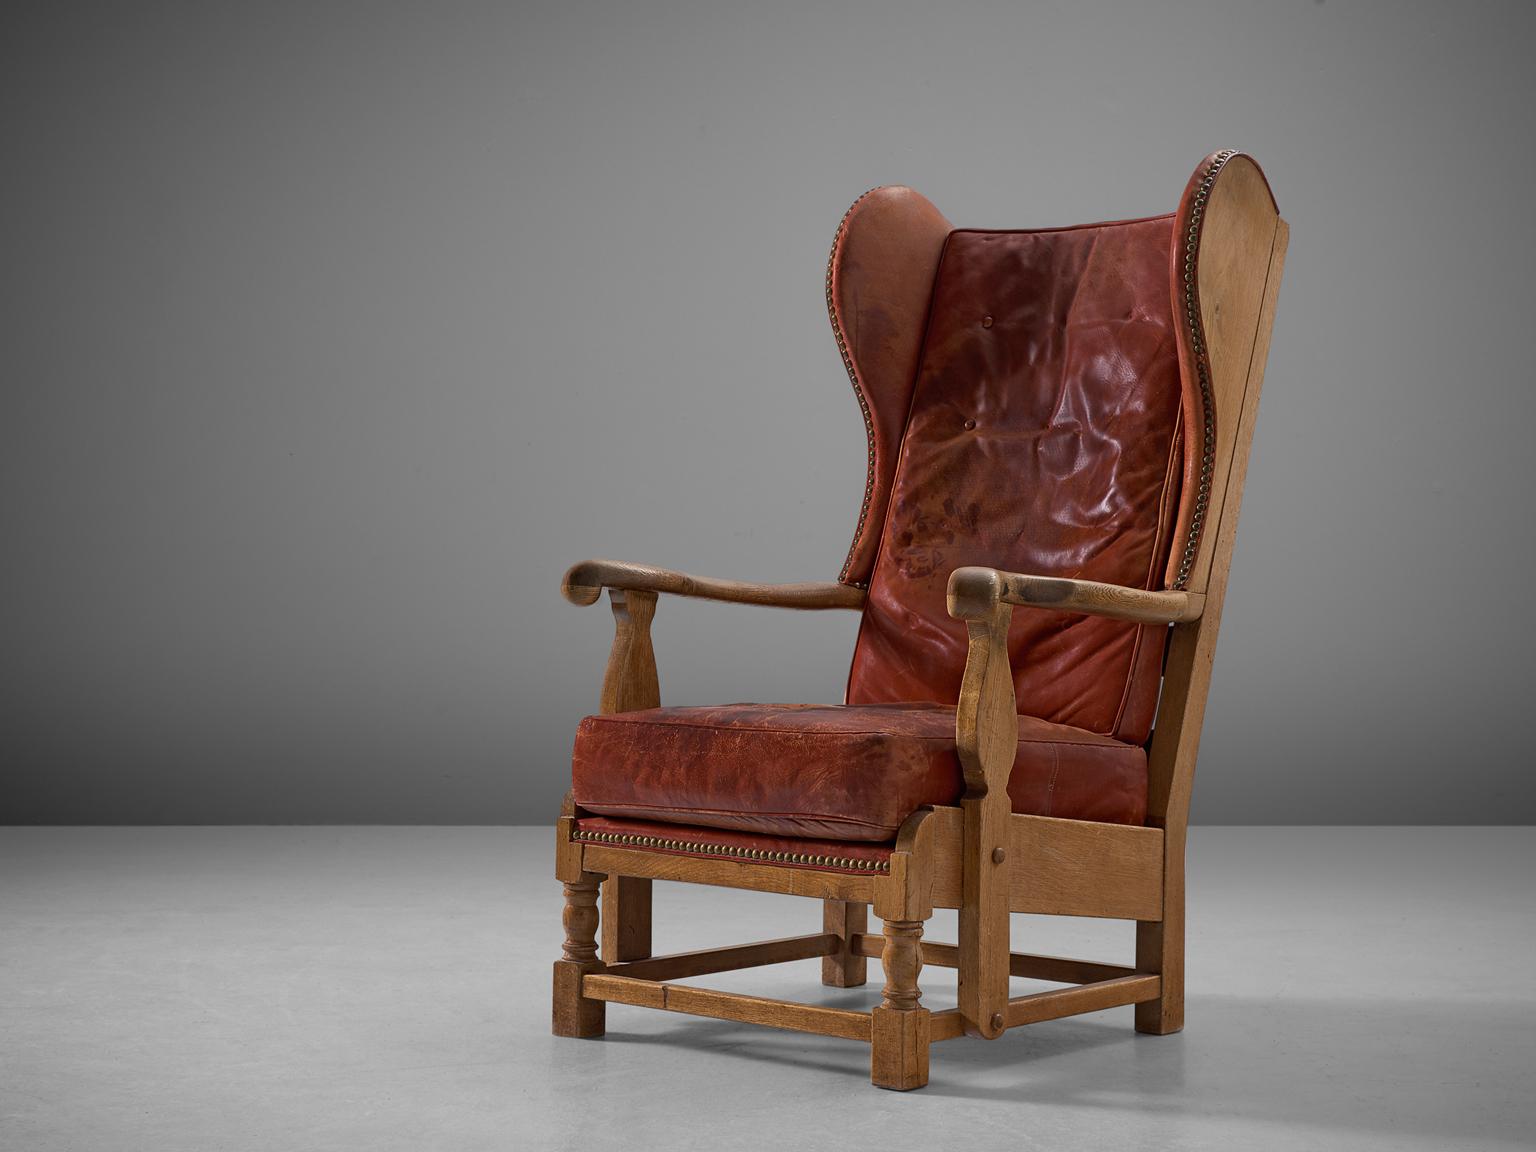 Lounge chair, red leather and oak, Denmark, 1930s.

This very rare early Danish lounge chair has the traits of a wingback chair whilst at the same time breathing the atmosphere of a gone century. This chair is easily pictured in a country house. At